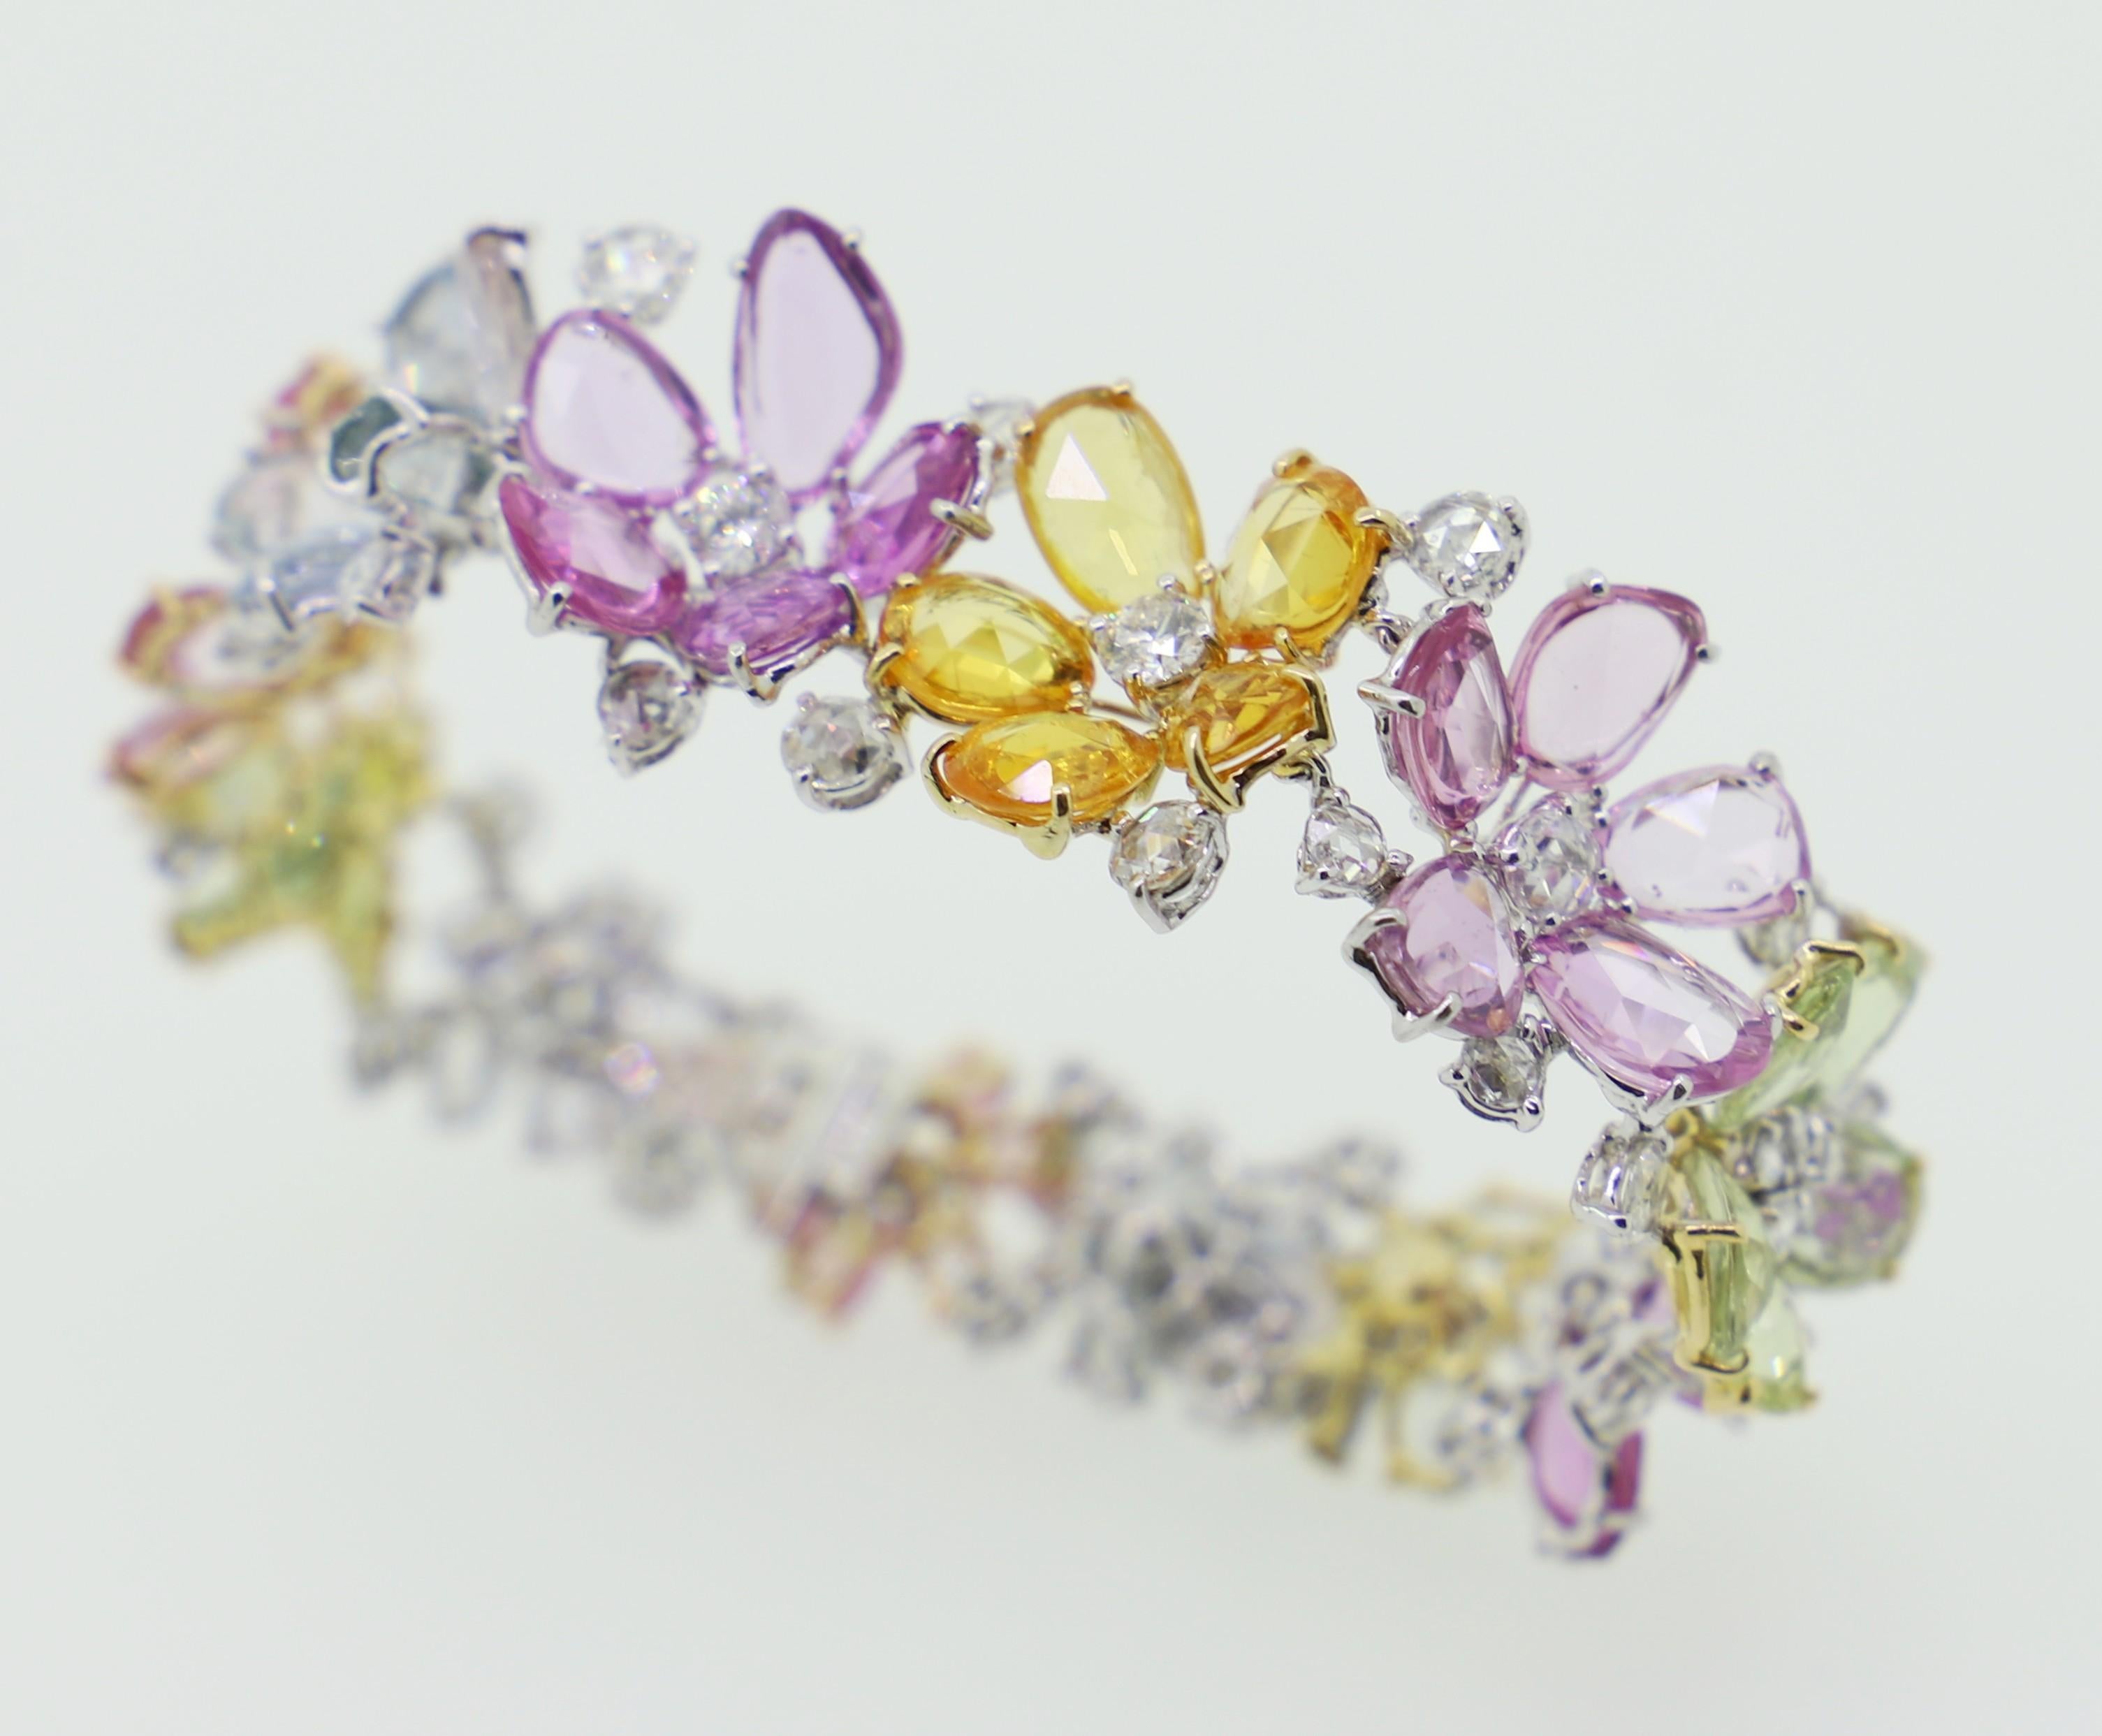 Designed to celebrete the freshness and lightness of Spring, this colourfull Sapphire and Diamond Cuff Bracelet sparkles with the colours of the rainbow.
The Rosecut Sapphires represent delicate Flowers, centred by White Diamonds.
In this entirely